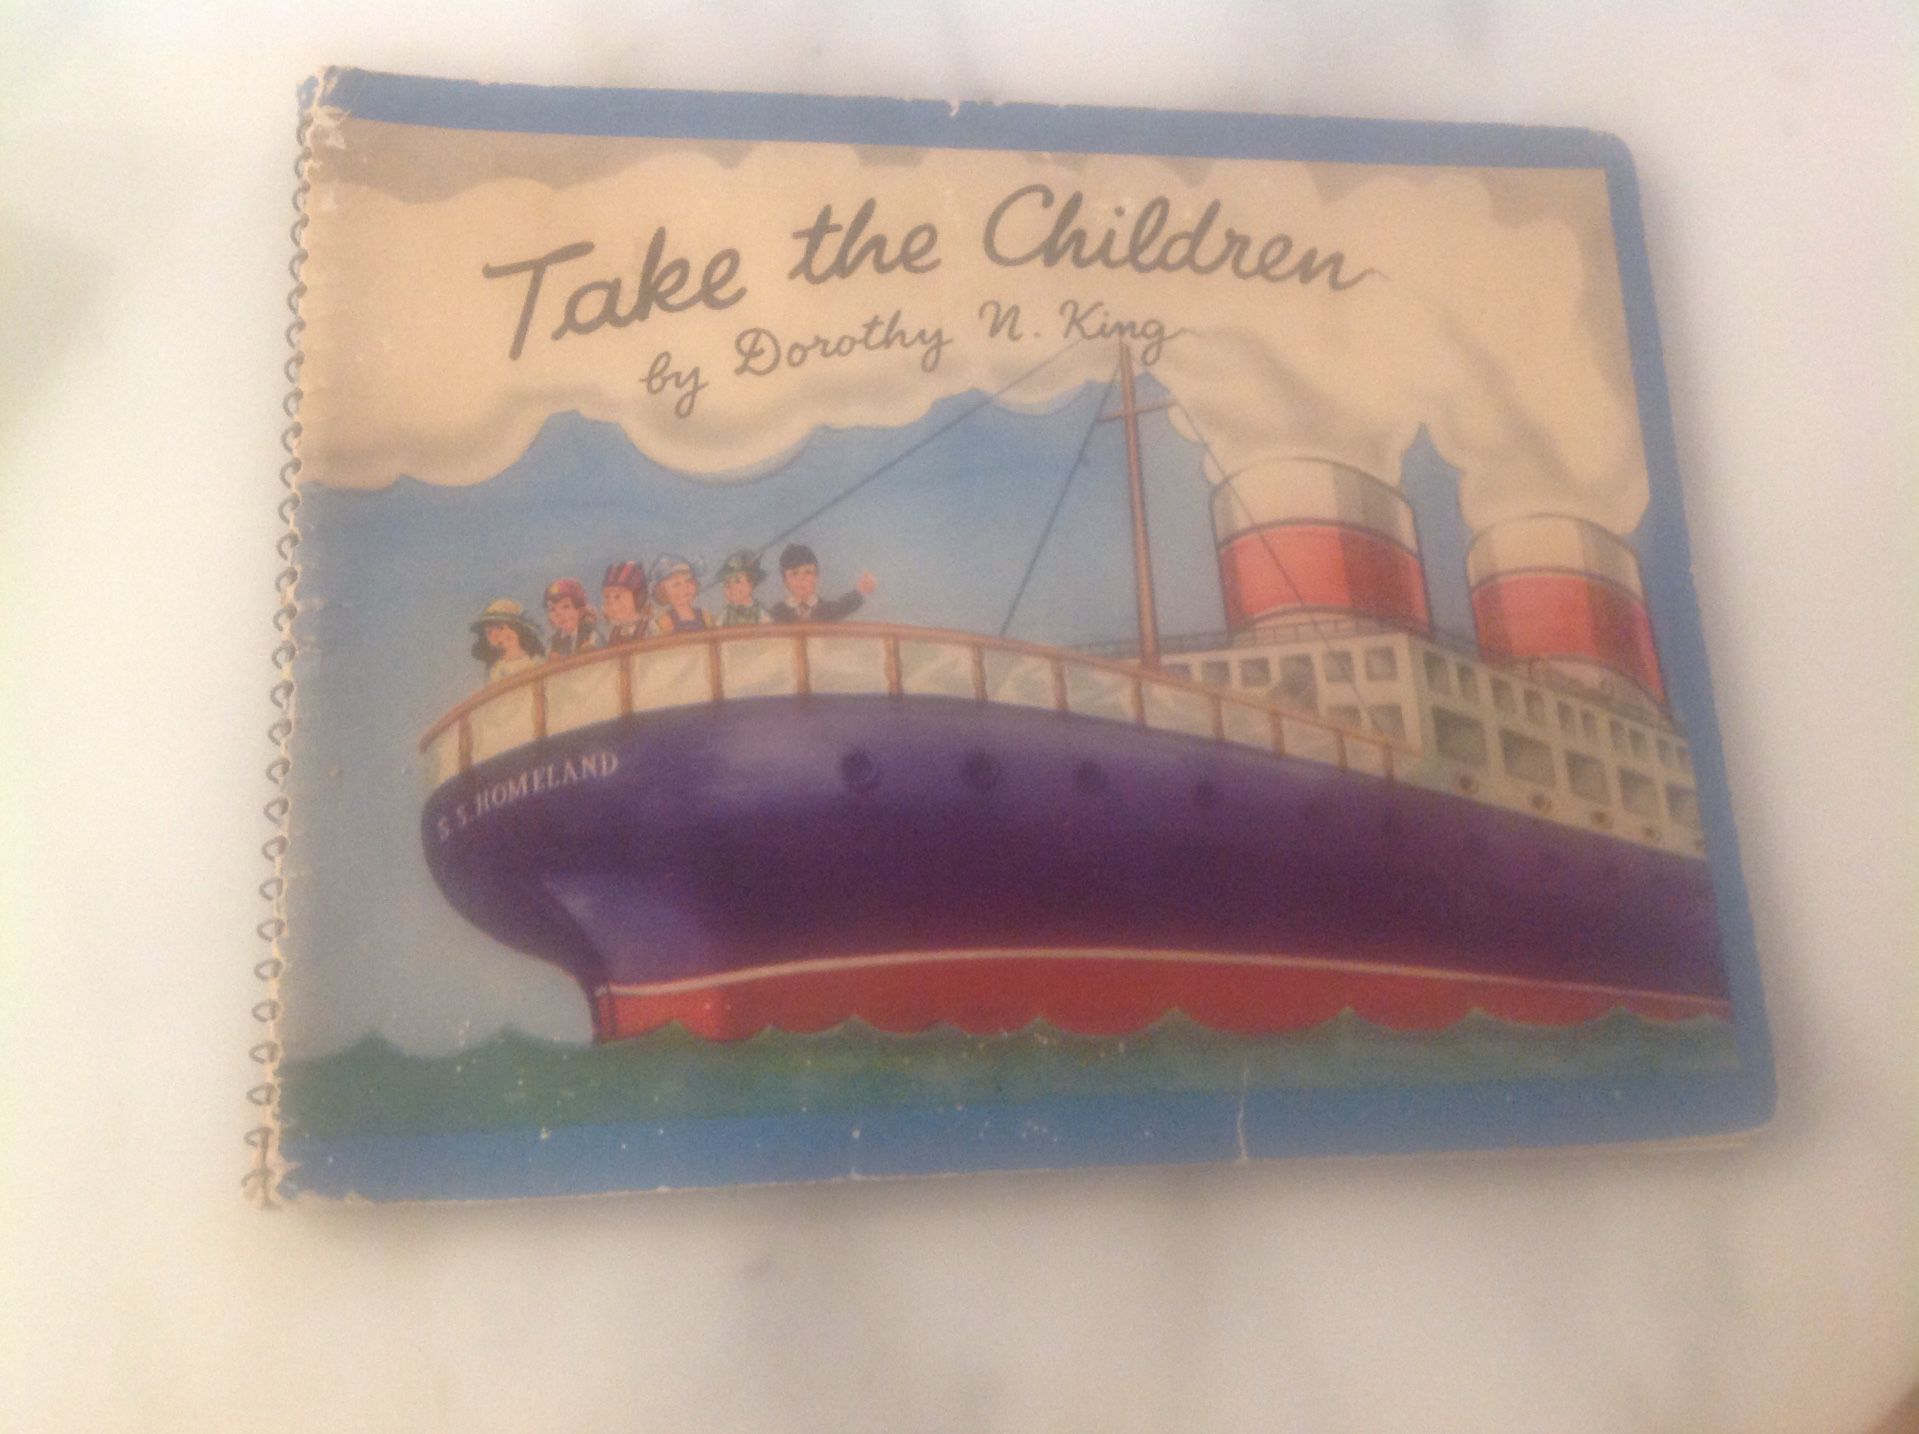 Take the Children by Dorothy N. King